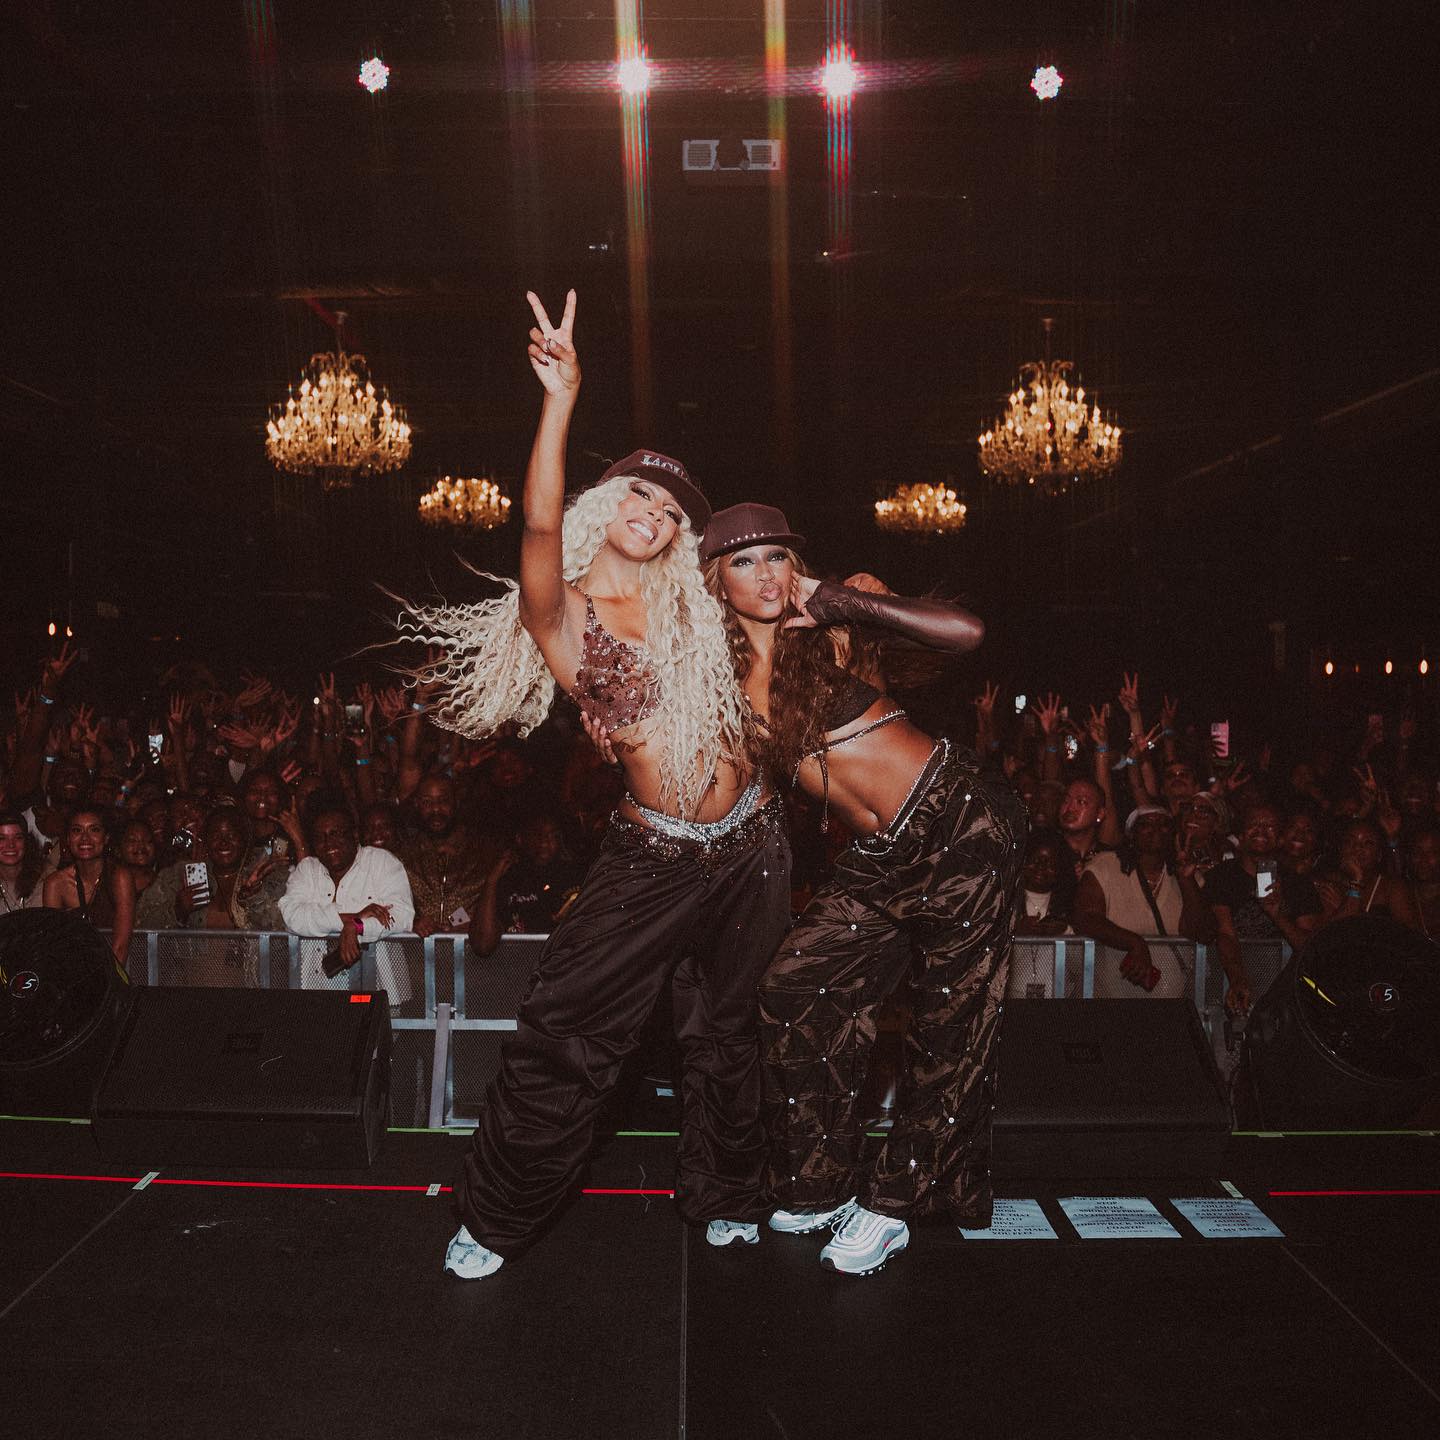 Charlotte you stole my heart!!! Y’all were LITTT! ???????????????? thank you!!ATL see you tonight ????????????@tacir.r thank you so much for lighting up this stage on your BIRTHDAY! In true Virgo fashion! Thank you for your energy and working so hard to learn this entire show in 7 days the midst of a whole other vma rehearsal schedule/performance too! All with no complaints, full tf out, with grace and gratitude! You are 1 of 1! Superstar and I’m so lucky to have you by my side on this tour!!!???? love you and thank you!!!????????????????To my band, crew and team: y’all are KILLING IT!!! It takes a village so thank you all so much! Show 4 here we come! @rachelle_jl @paradhime @kaylamarie.j @chanel.jm @jooeljames@mua.alexander @a1_sound @matthewburnett @themommymonet @gcmusiq @underdog.wav @chesleycheese @mikesassano @iamharryallen@distoothpick @congobluefather@tonelopez1 @devx_lights @allypetitti laueme_9m